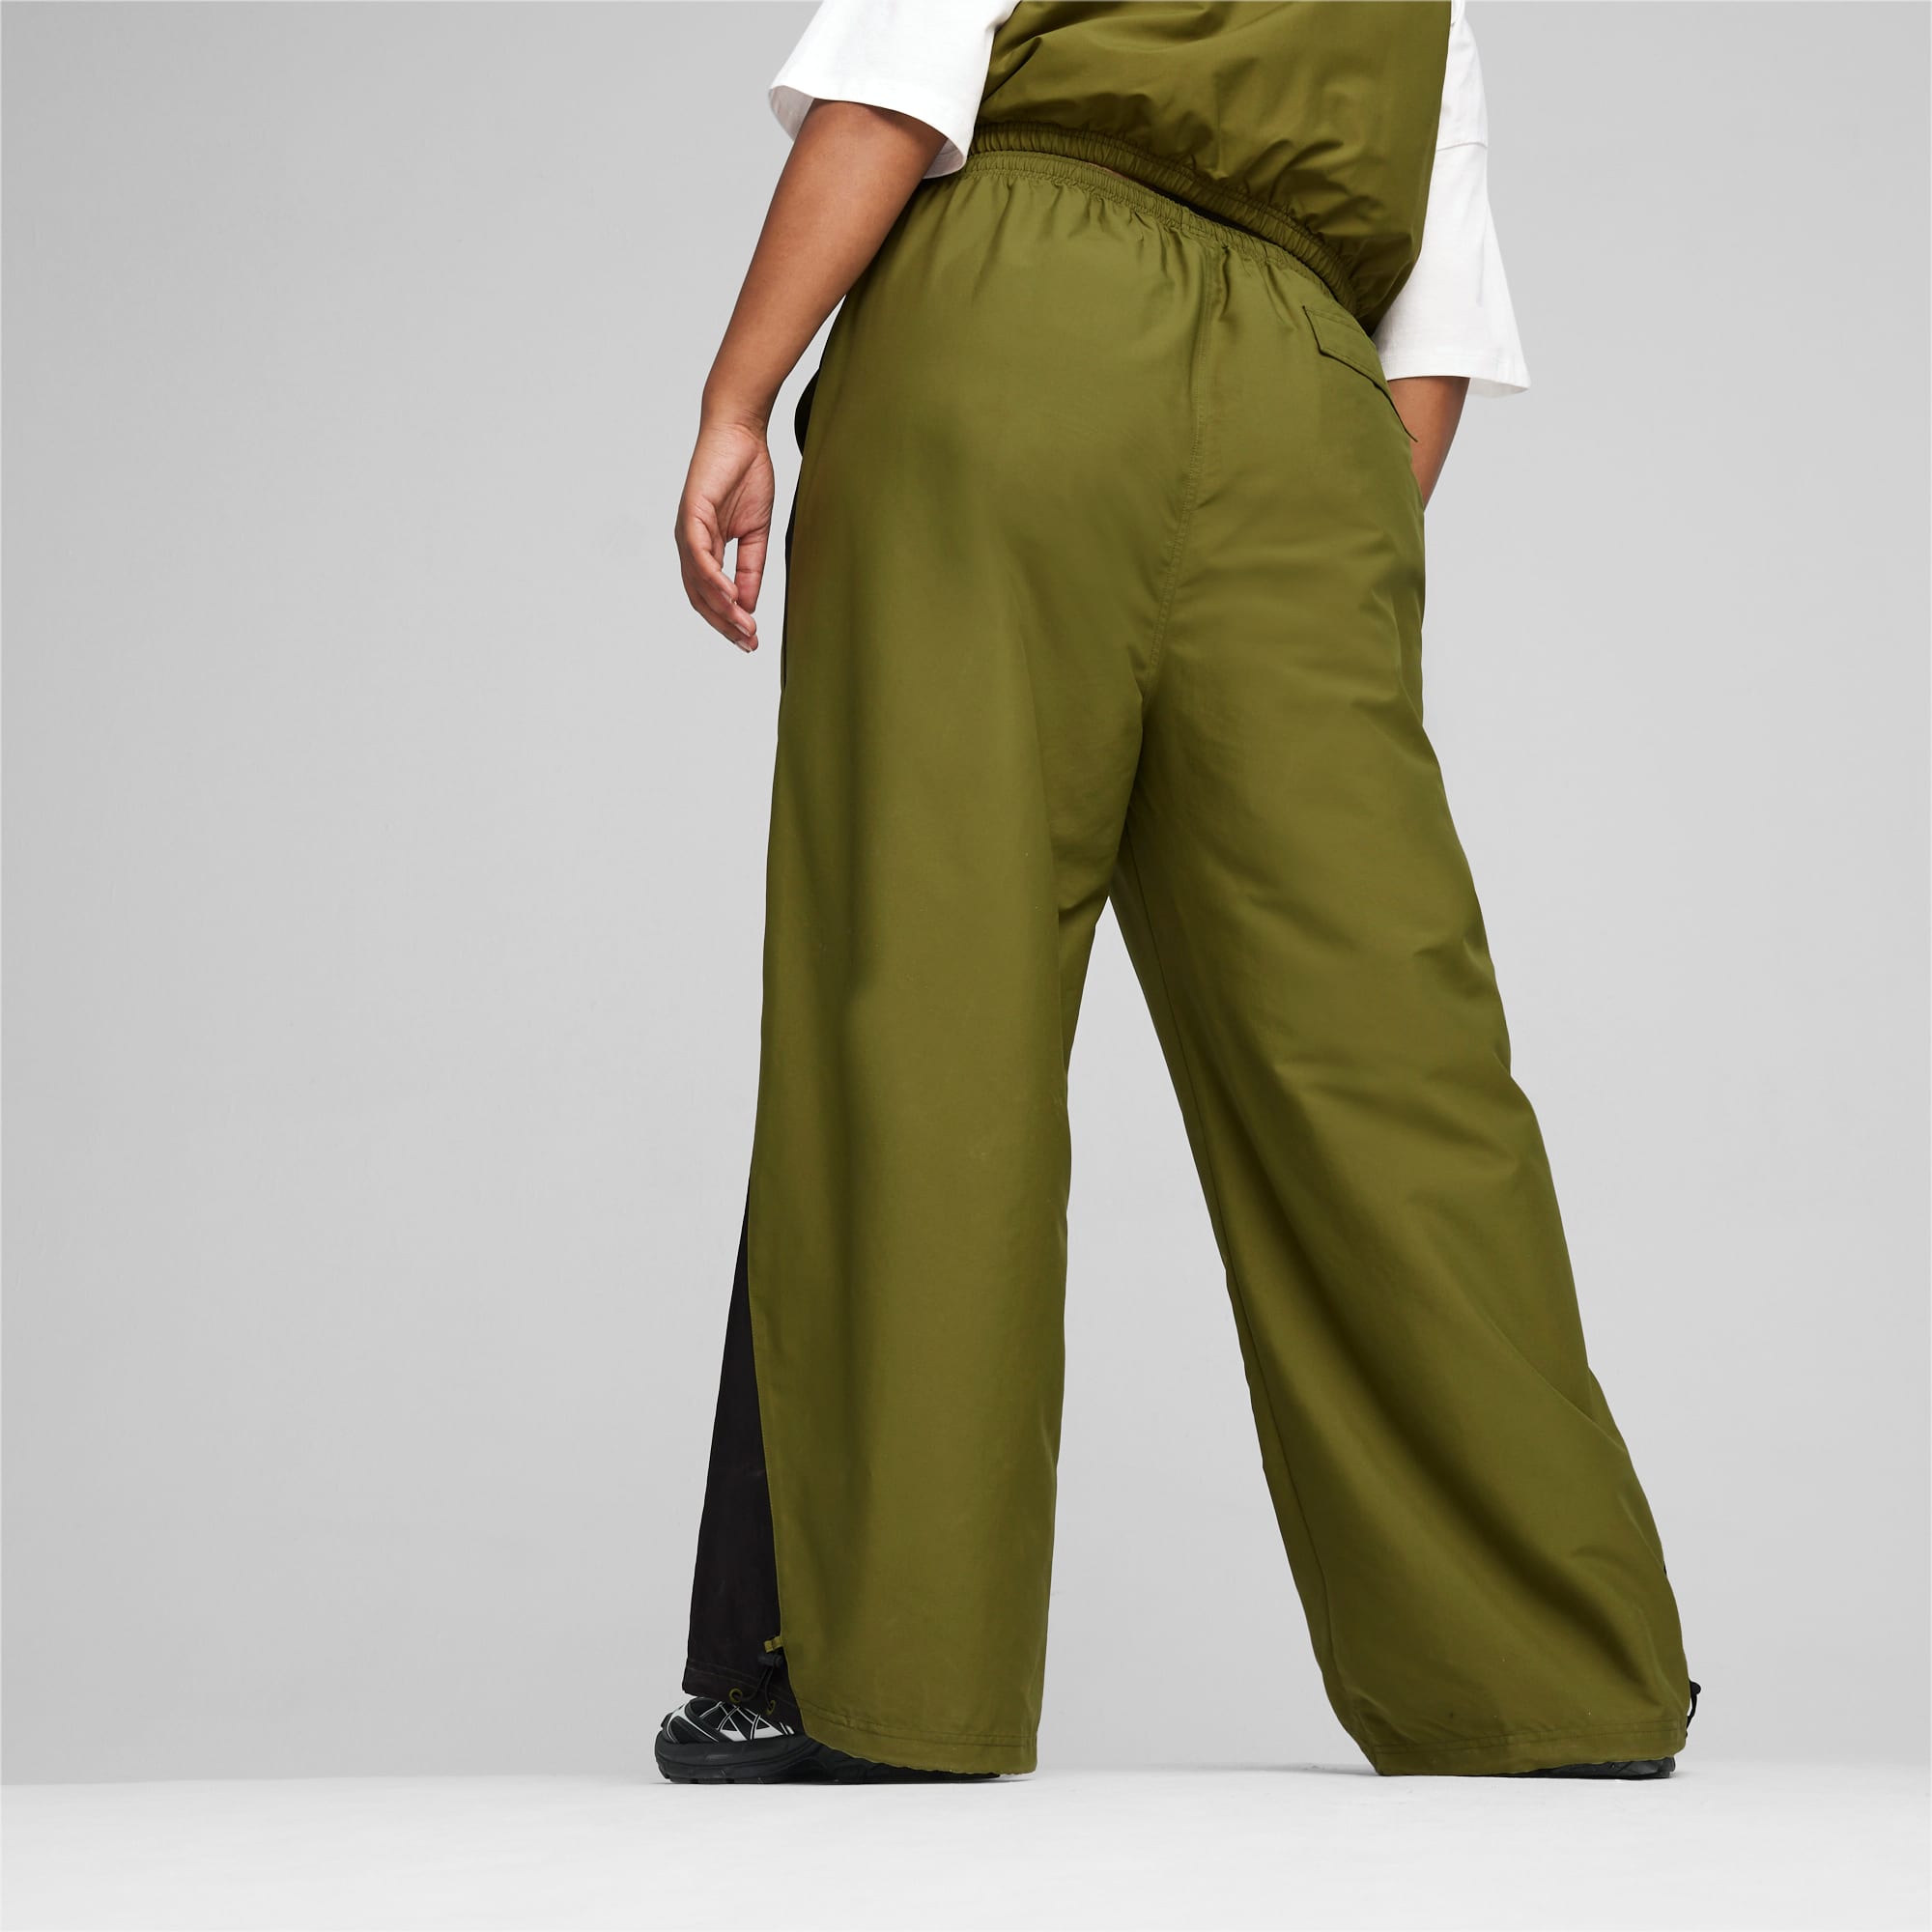 Women's PUMA Dare To Parachute Pants, Olive Green, Size M, Clothing